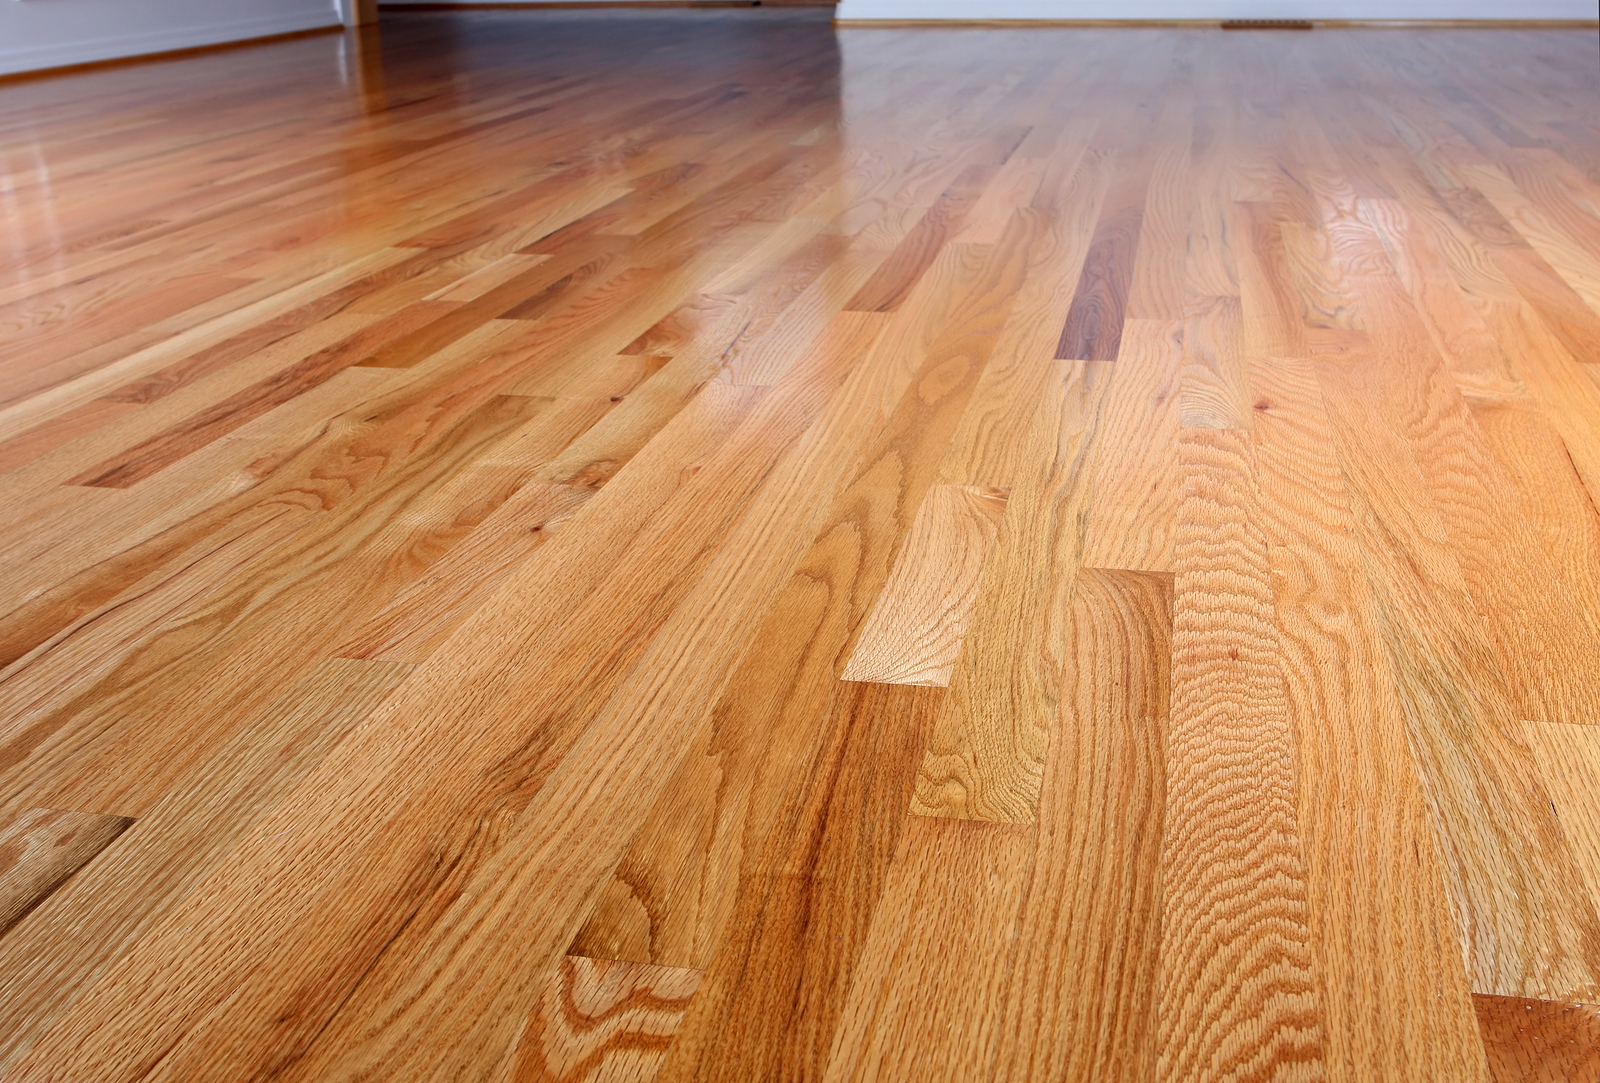 What’s the difference between red oak flooring and white oak flooring